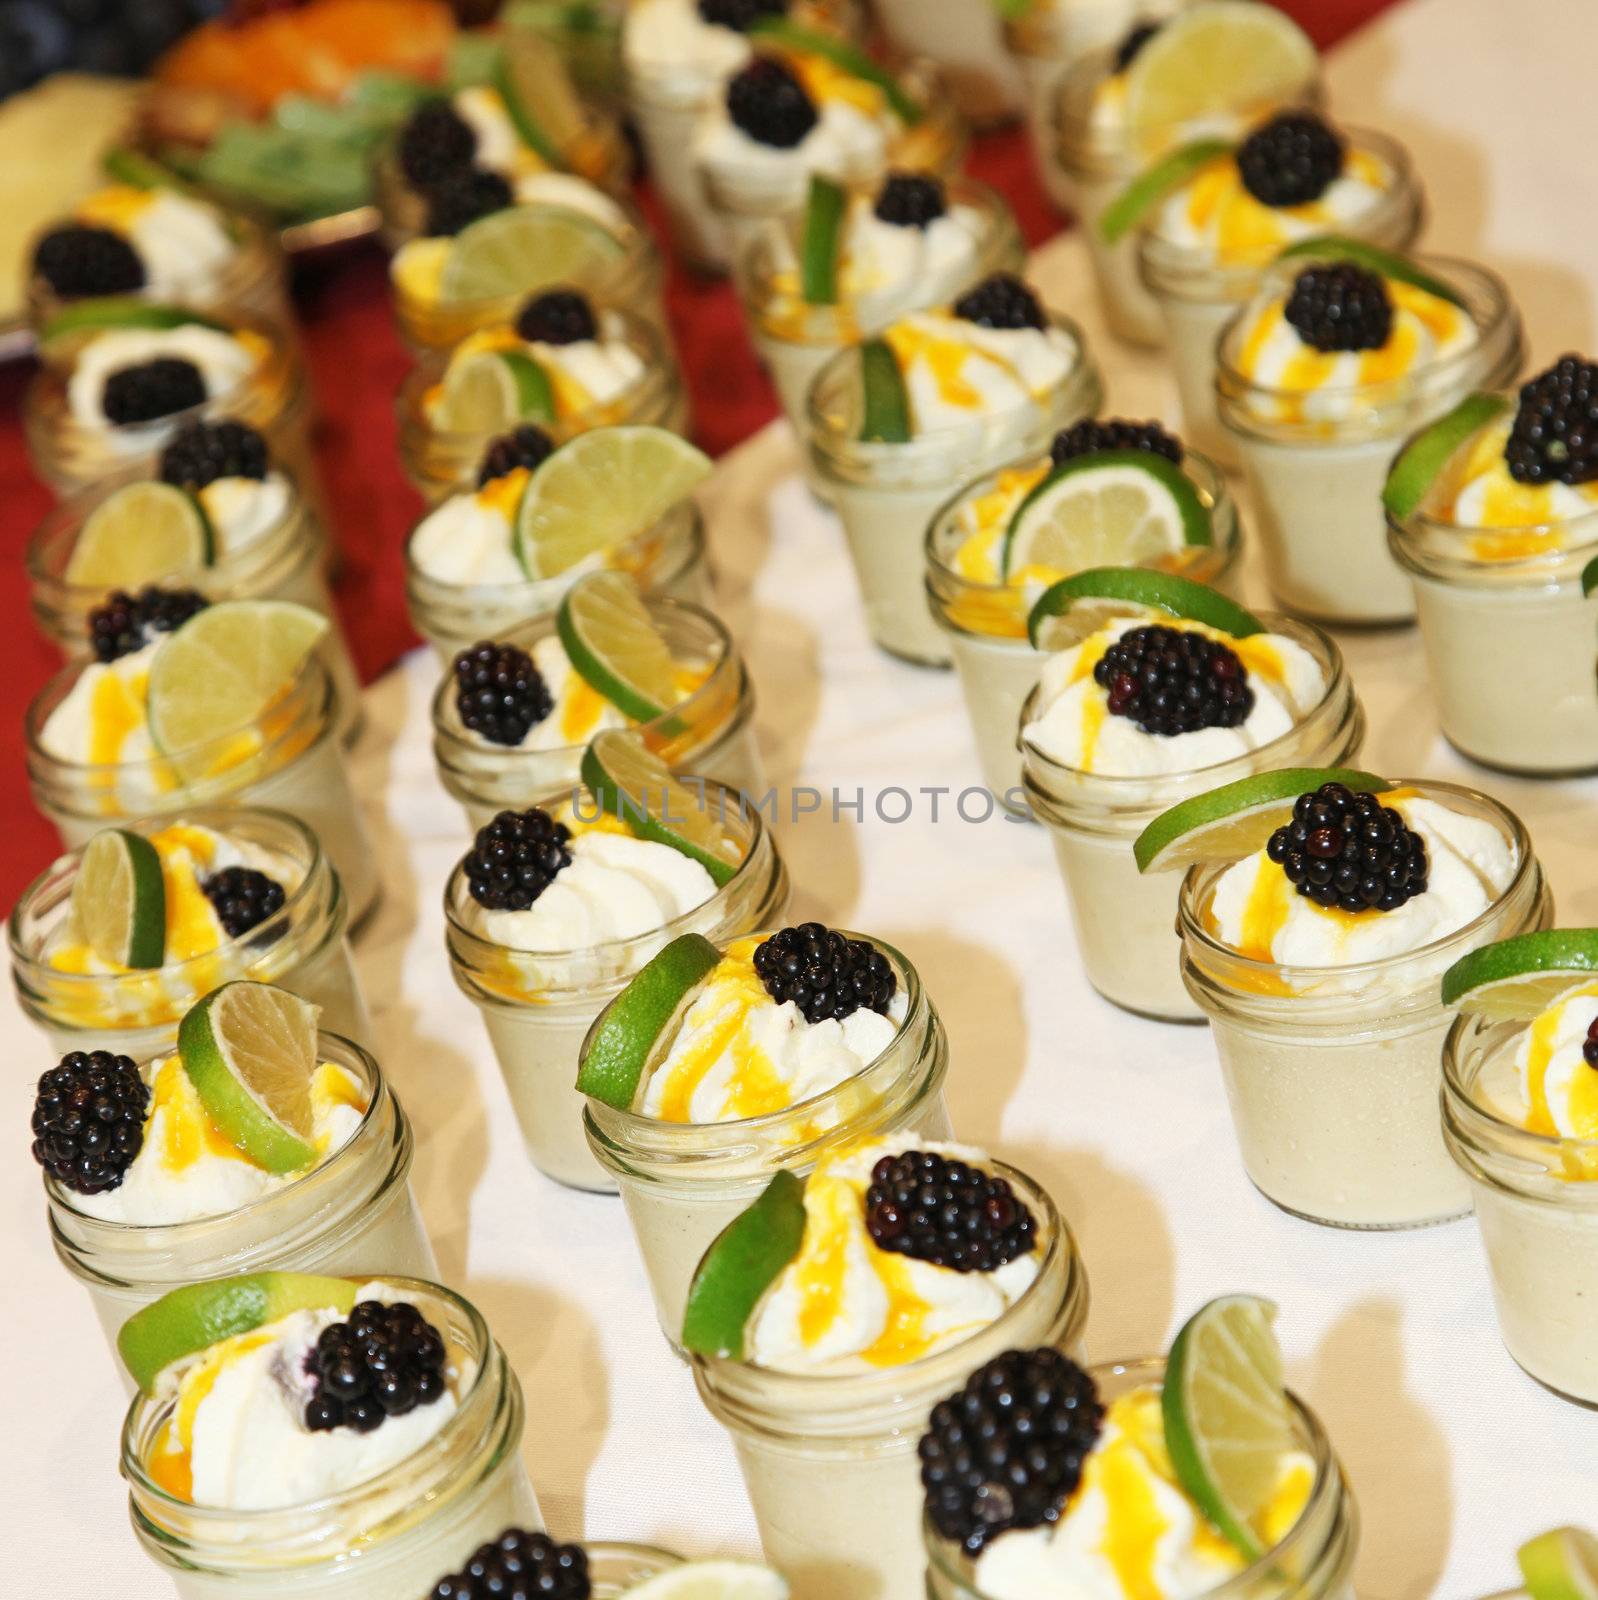  Pudding decorated with fruit by Farina6000